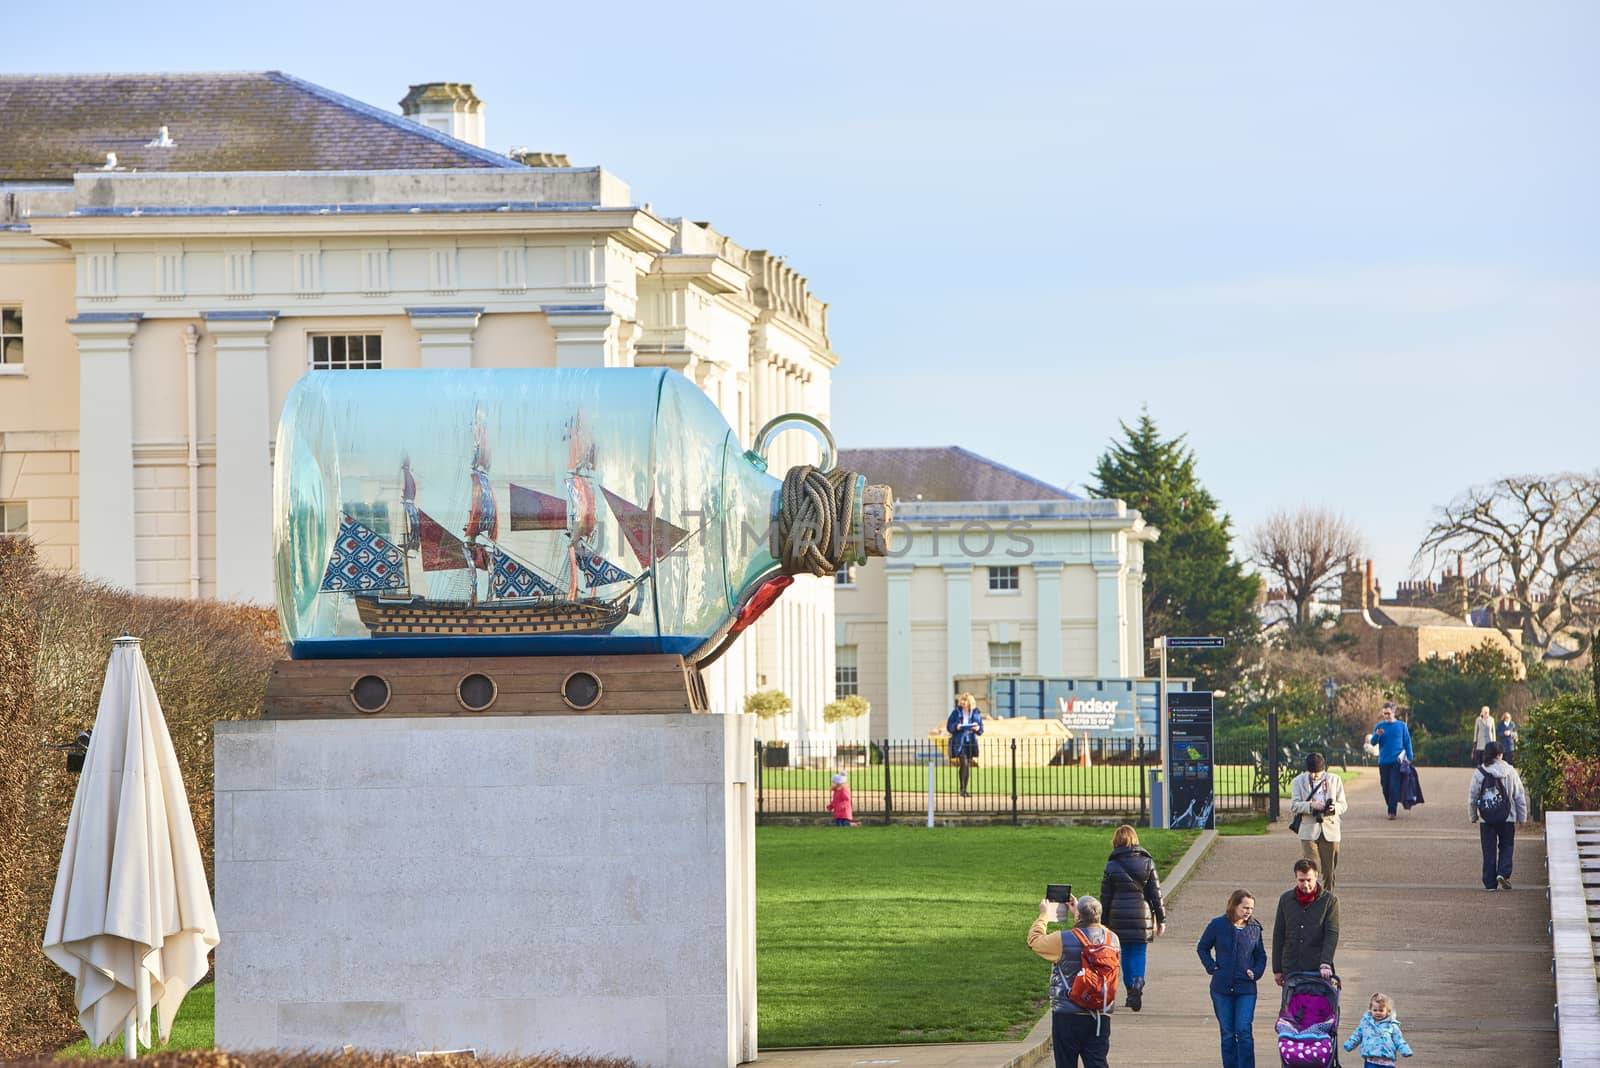 LONDON, UK - DECEMBER 28: Yinka Shonibare's piece entitled Nelson's Ship in a Bottle outside the National Maritime Museum, in Greenwich. December 28, 2015 in London.